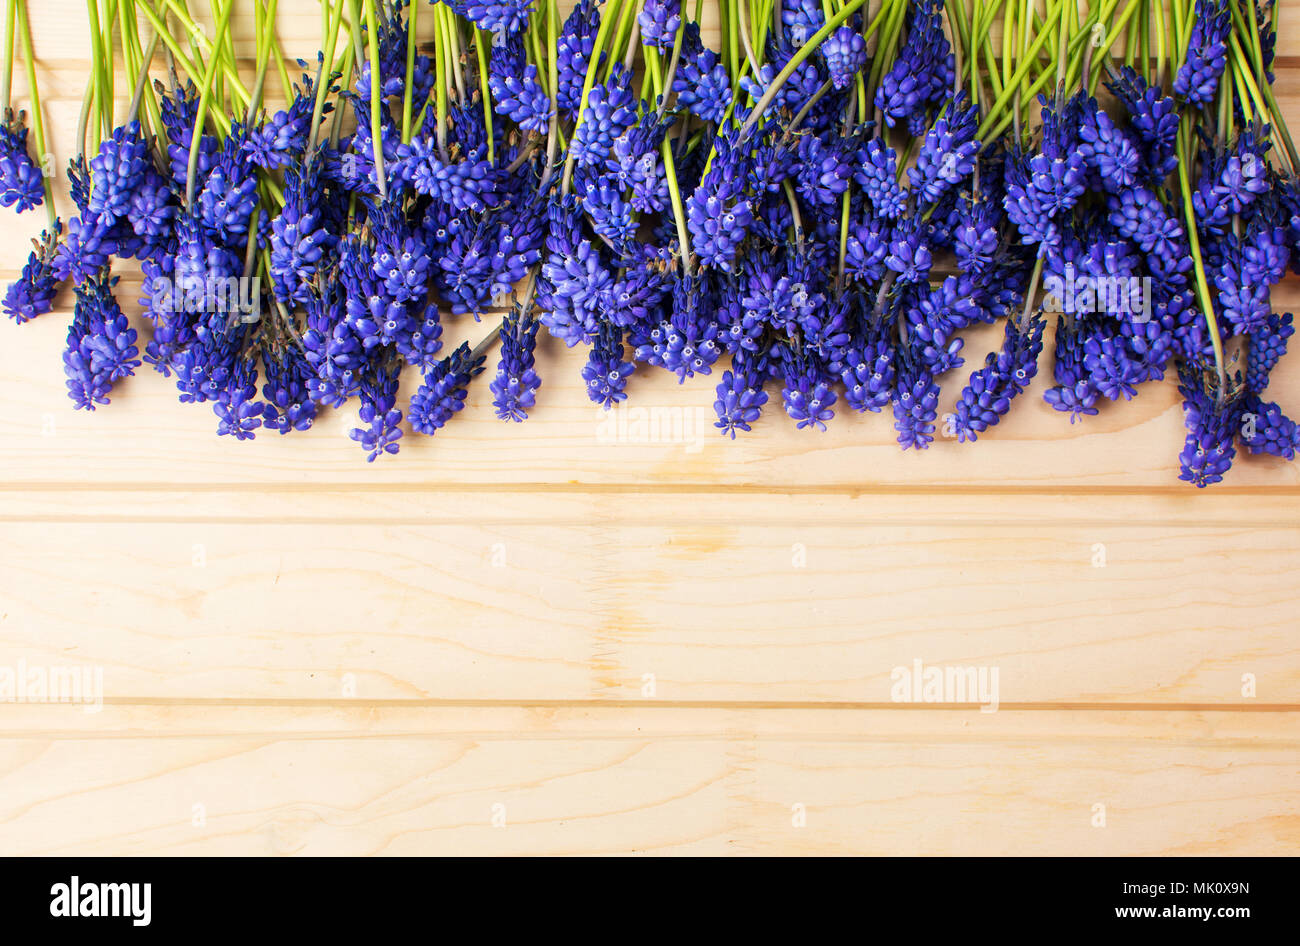 Hyacinth flowers on a wooden board with copyspace Stock Photo